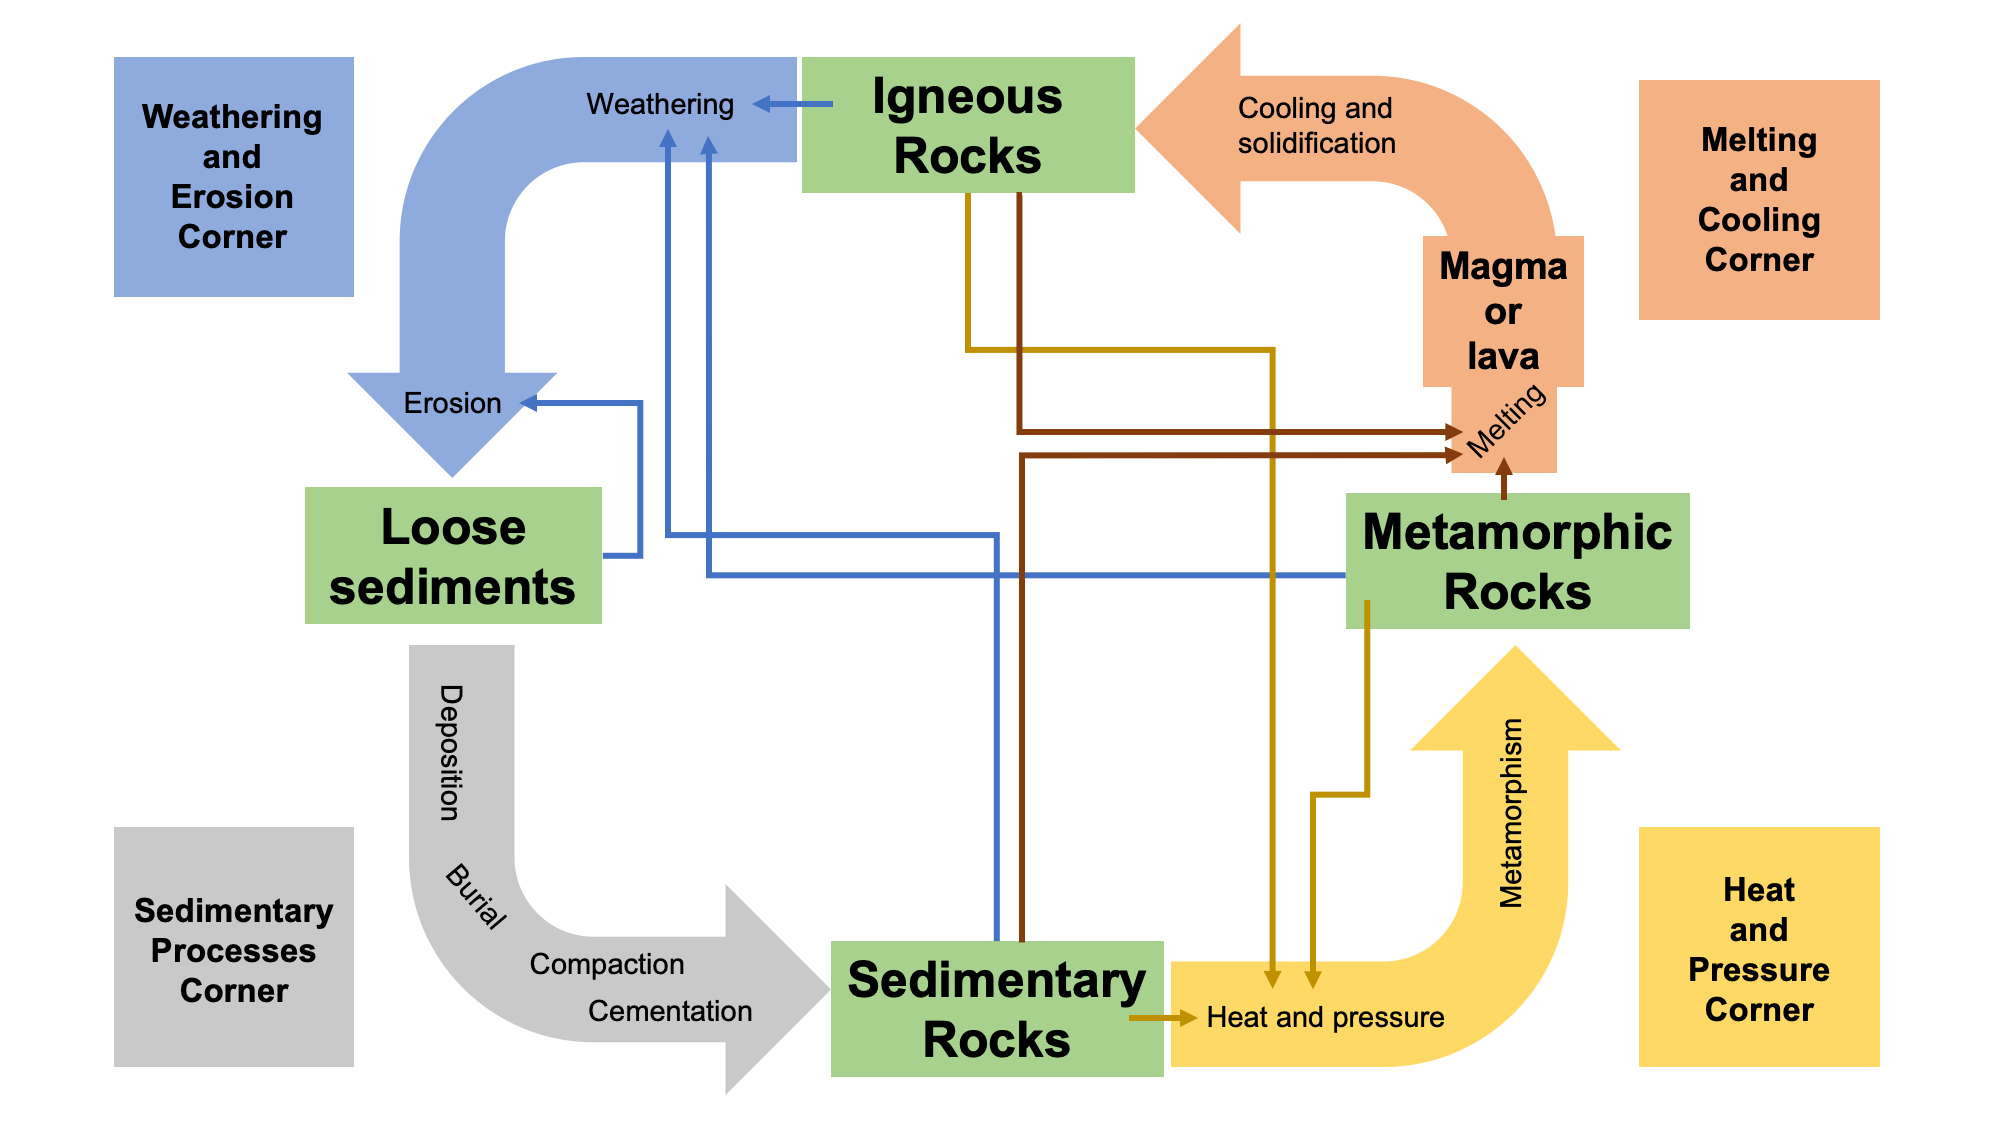 A diagram showing the rock cycle and its connections.